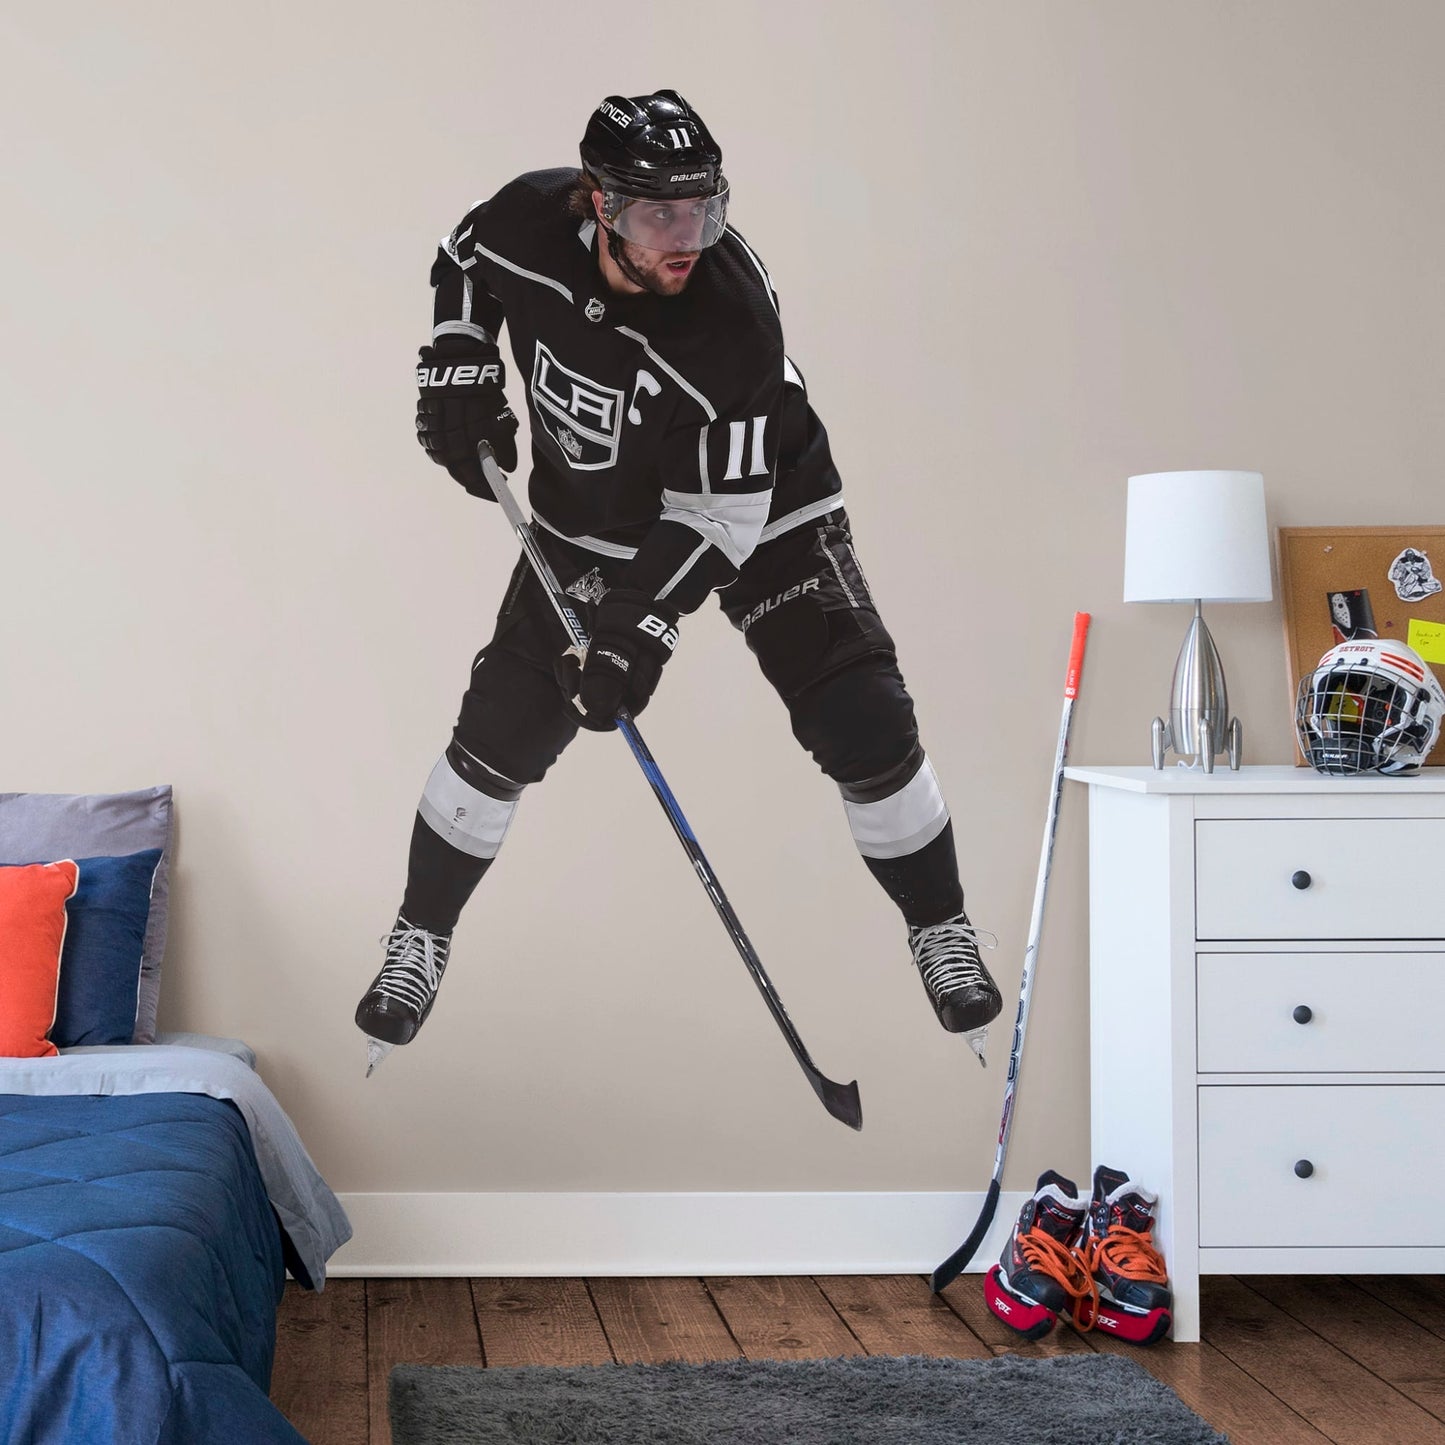 Anze Kopitar - Officially Licensed NHL Removable Wall Decal